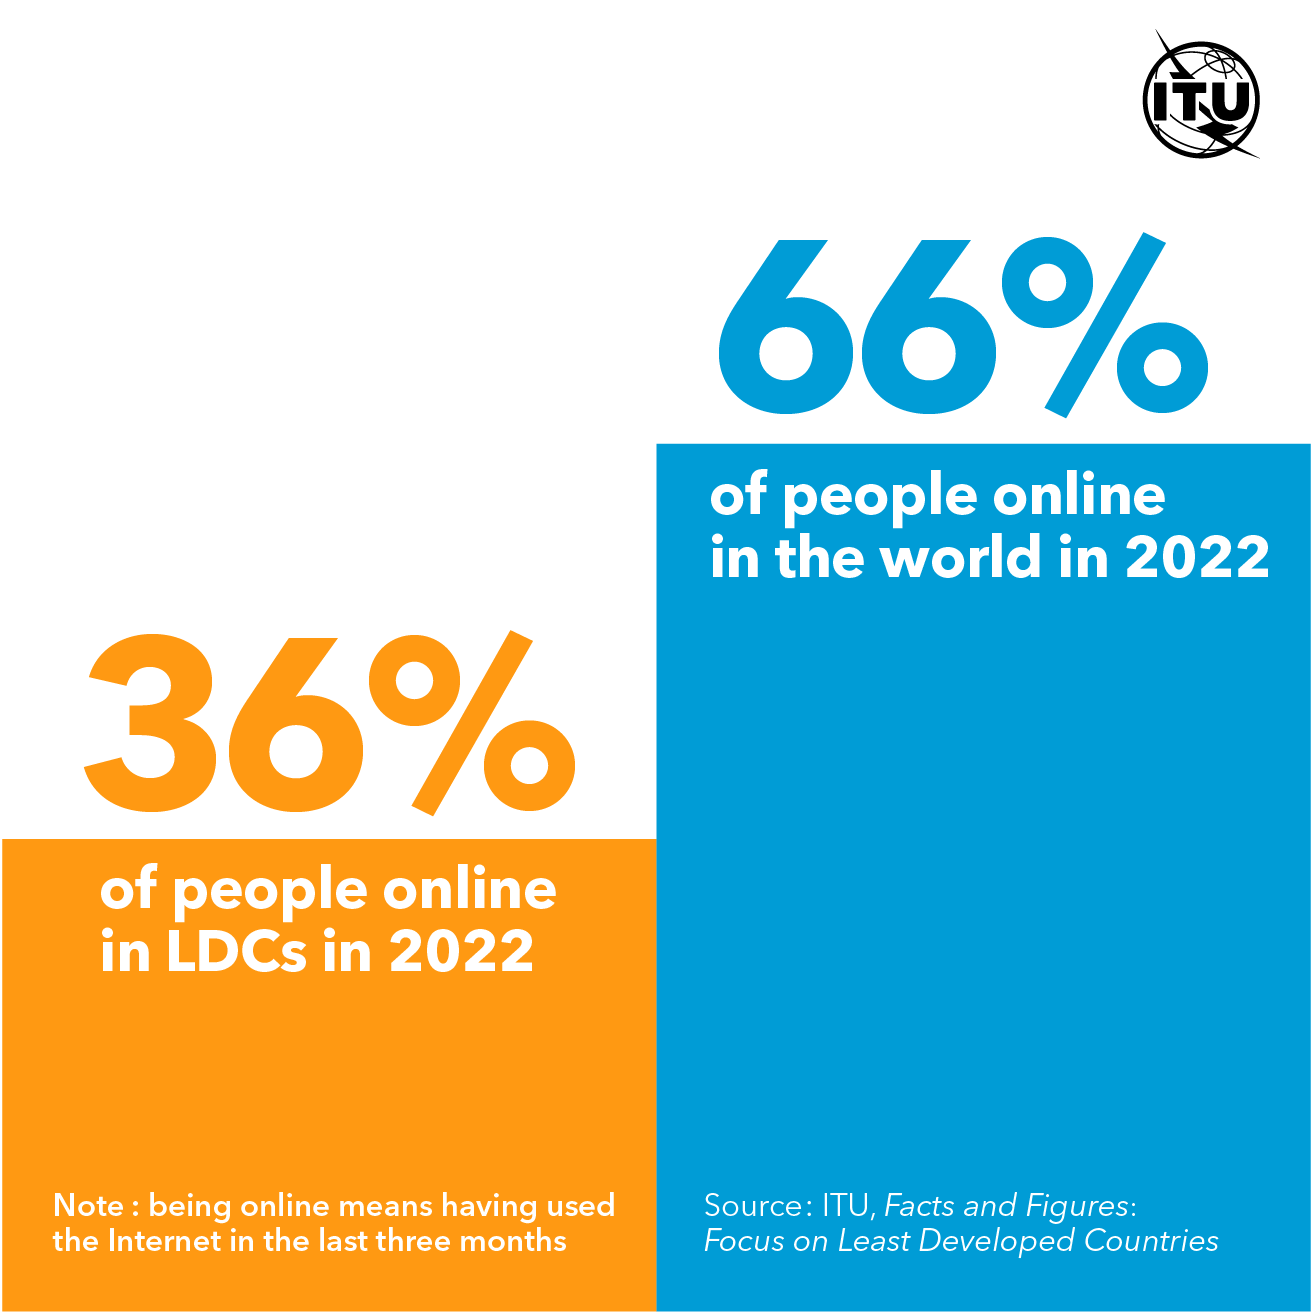 Infographic that shows 36% of people online in LDCs vs 66% of people online in the world.